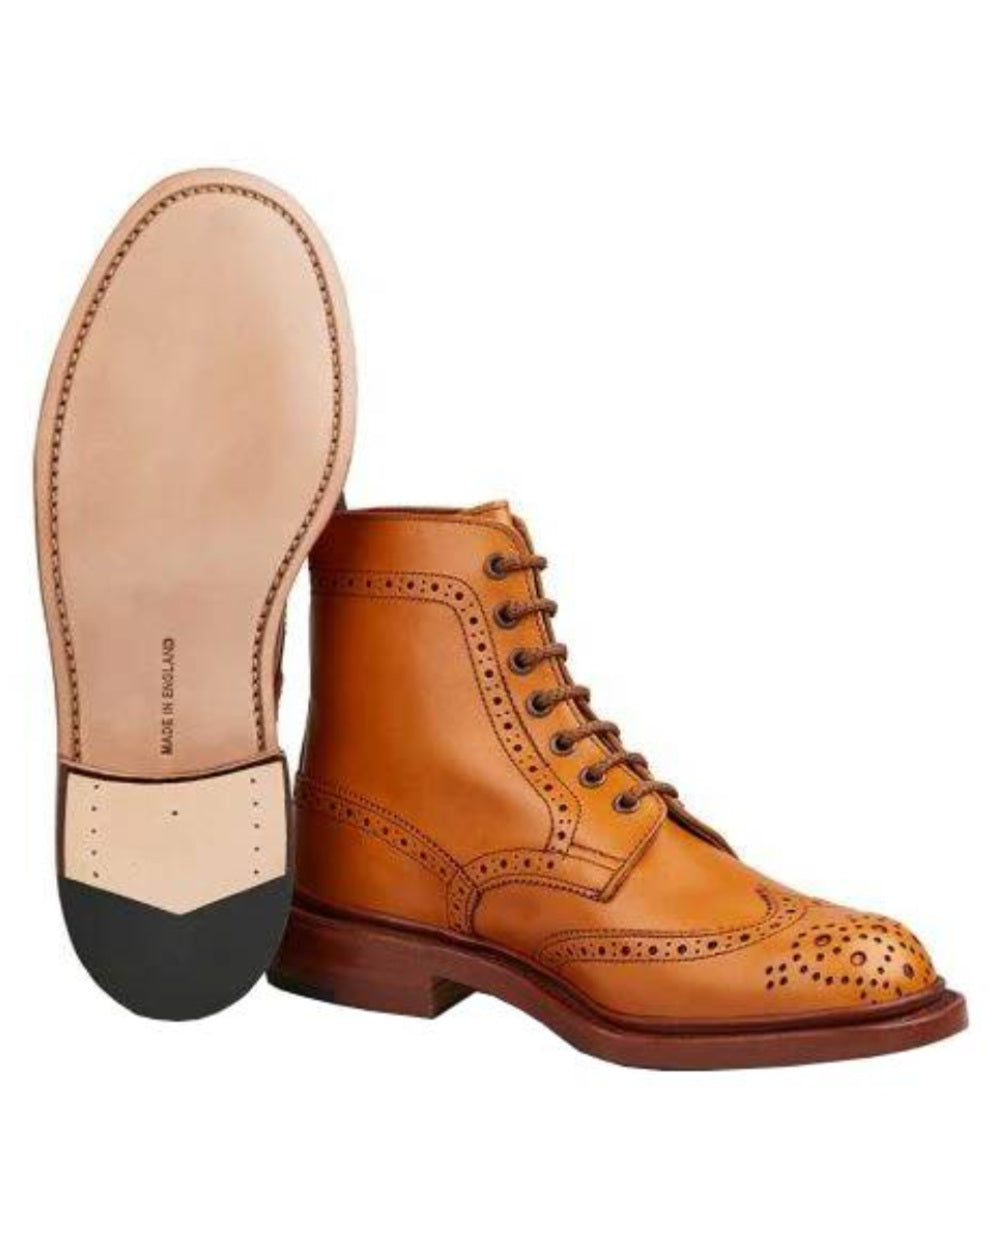 Acorn Antique Coloured Trickers Stephy Brogue Boot On A White Background 